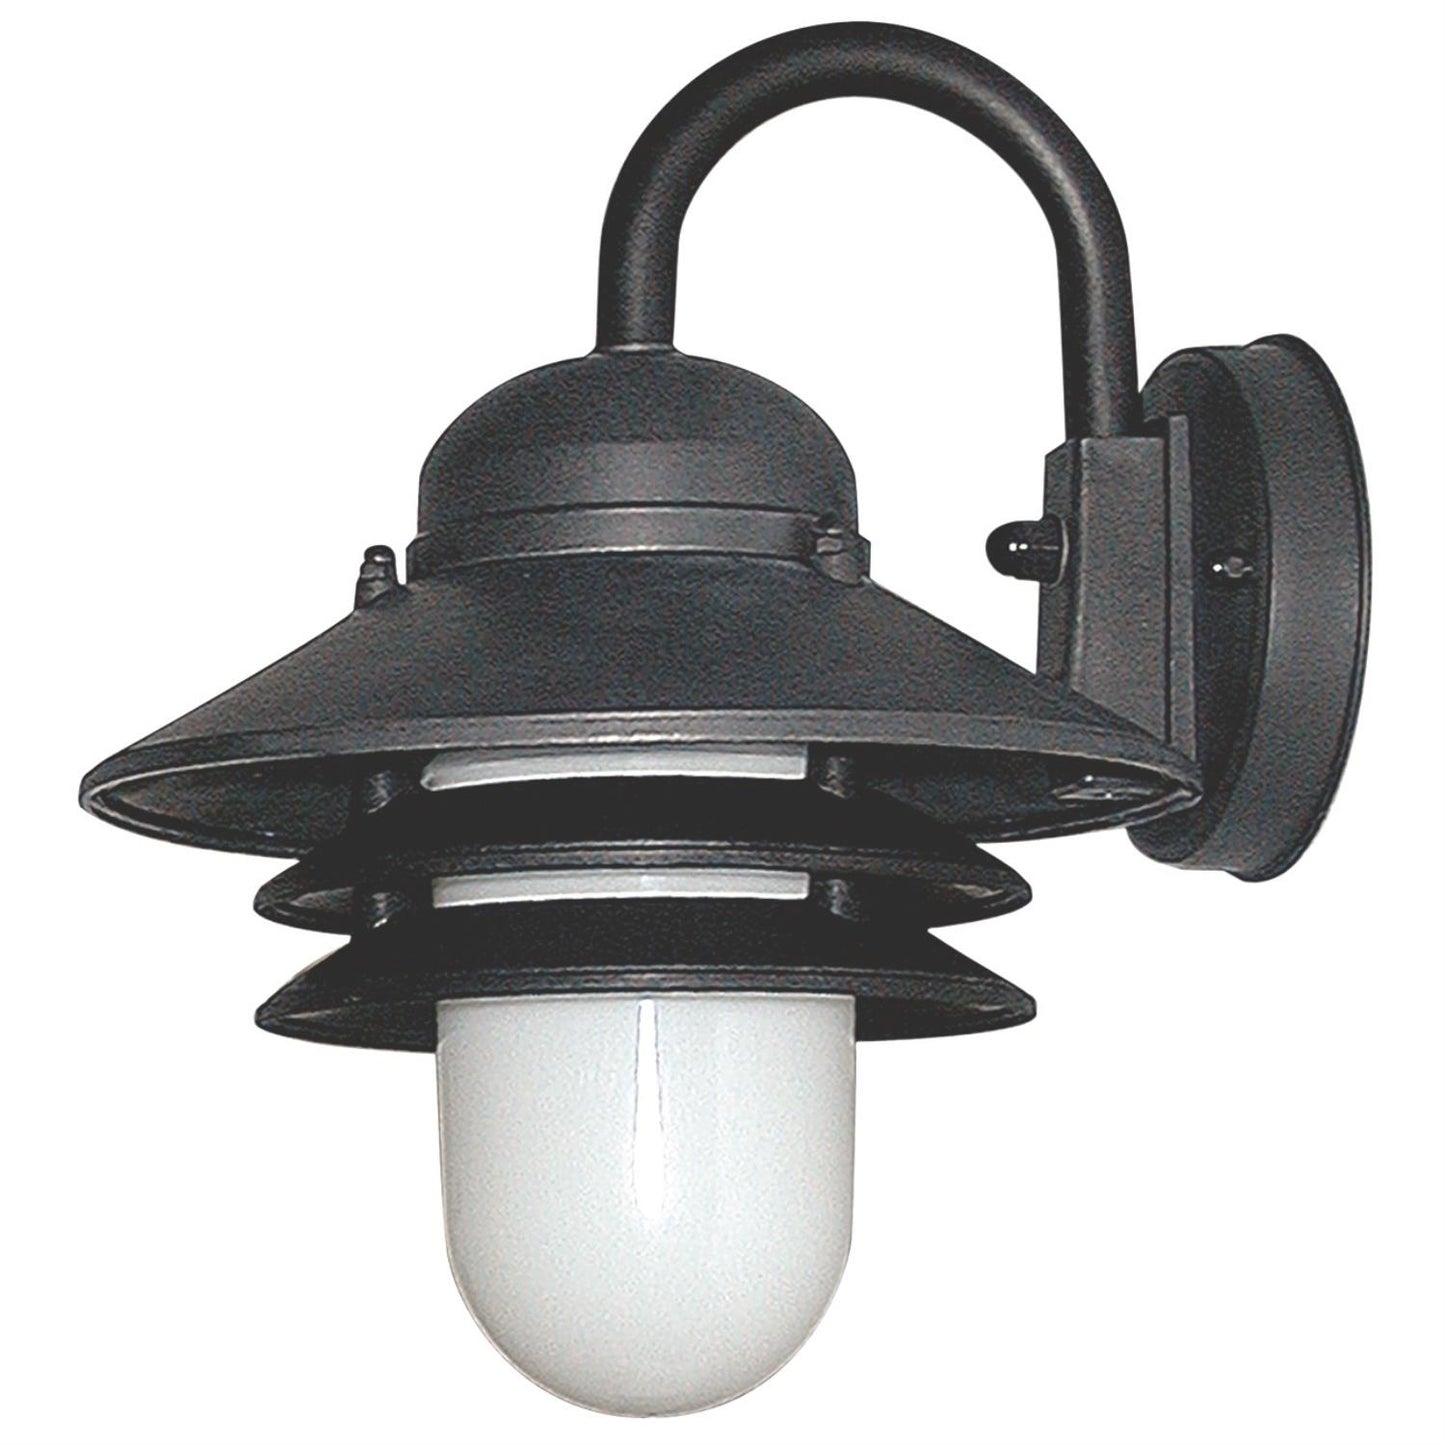 Sunlite Decorative Outdoor Energy Saving Nautical Collection Fixture, Black Finish, Clear Lens